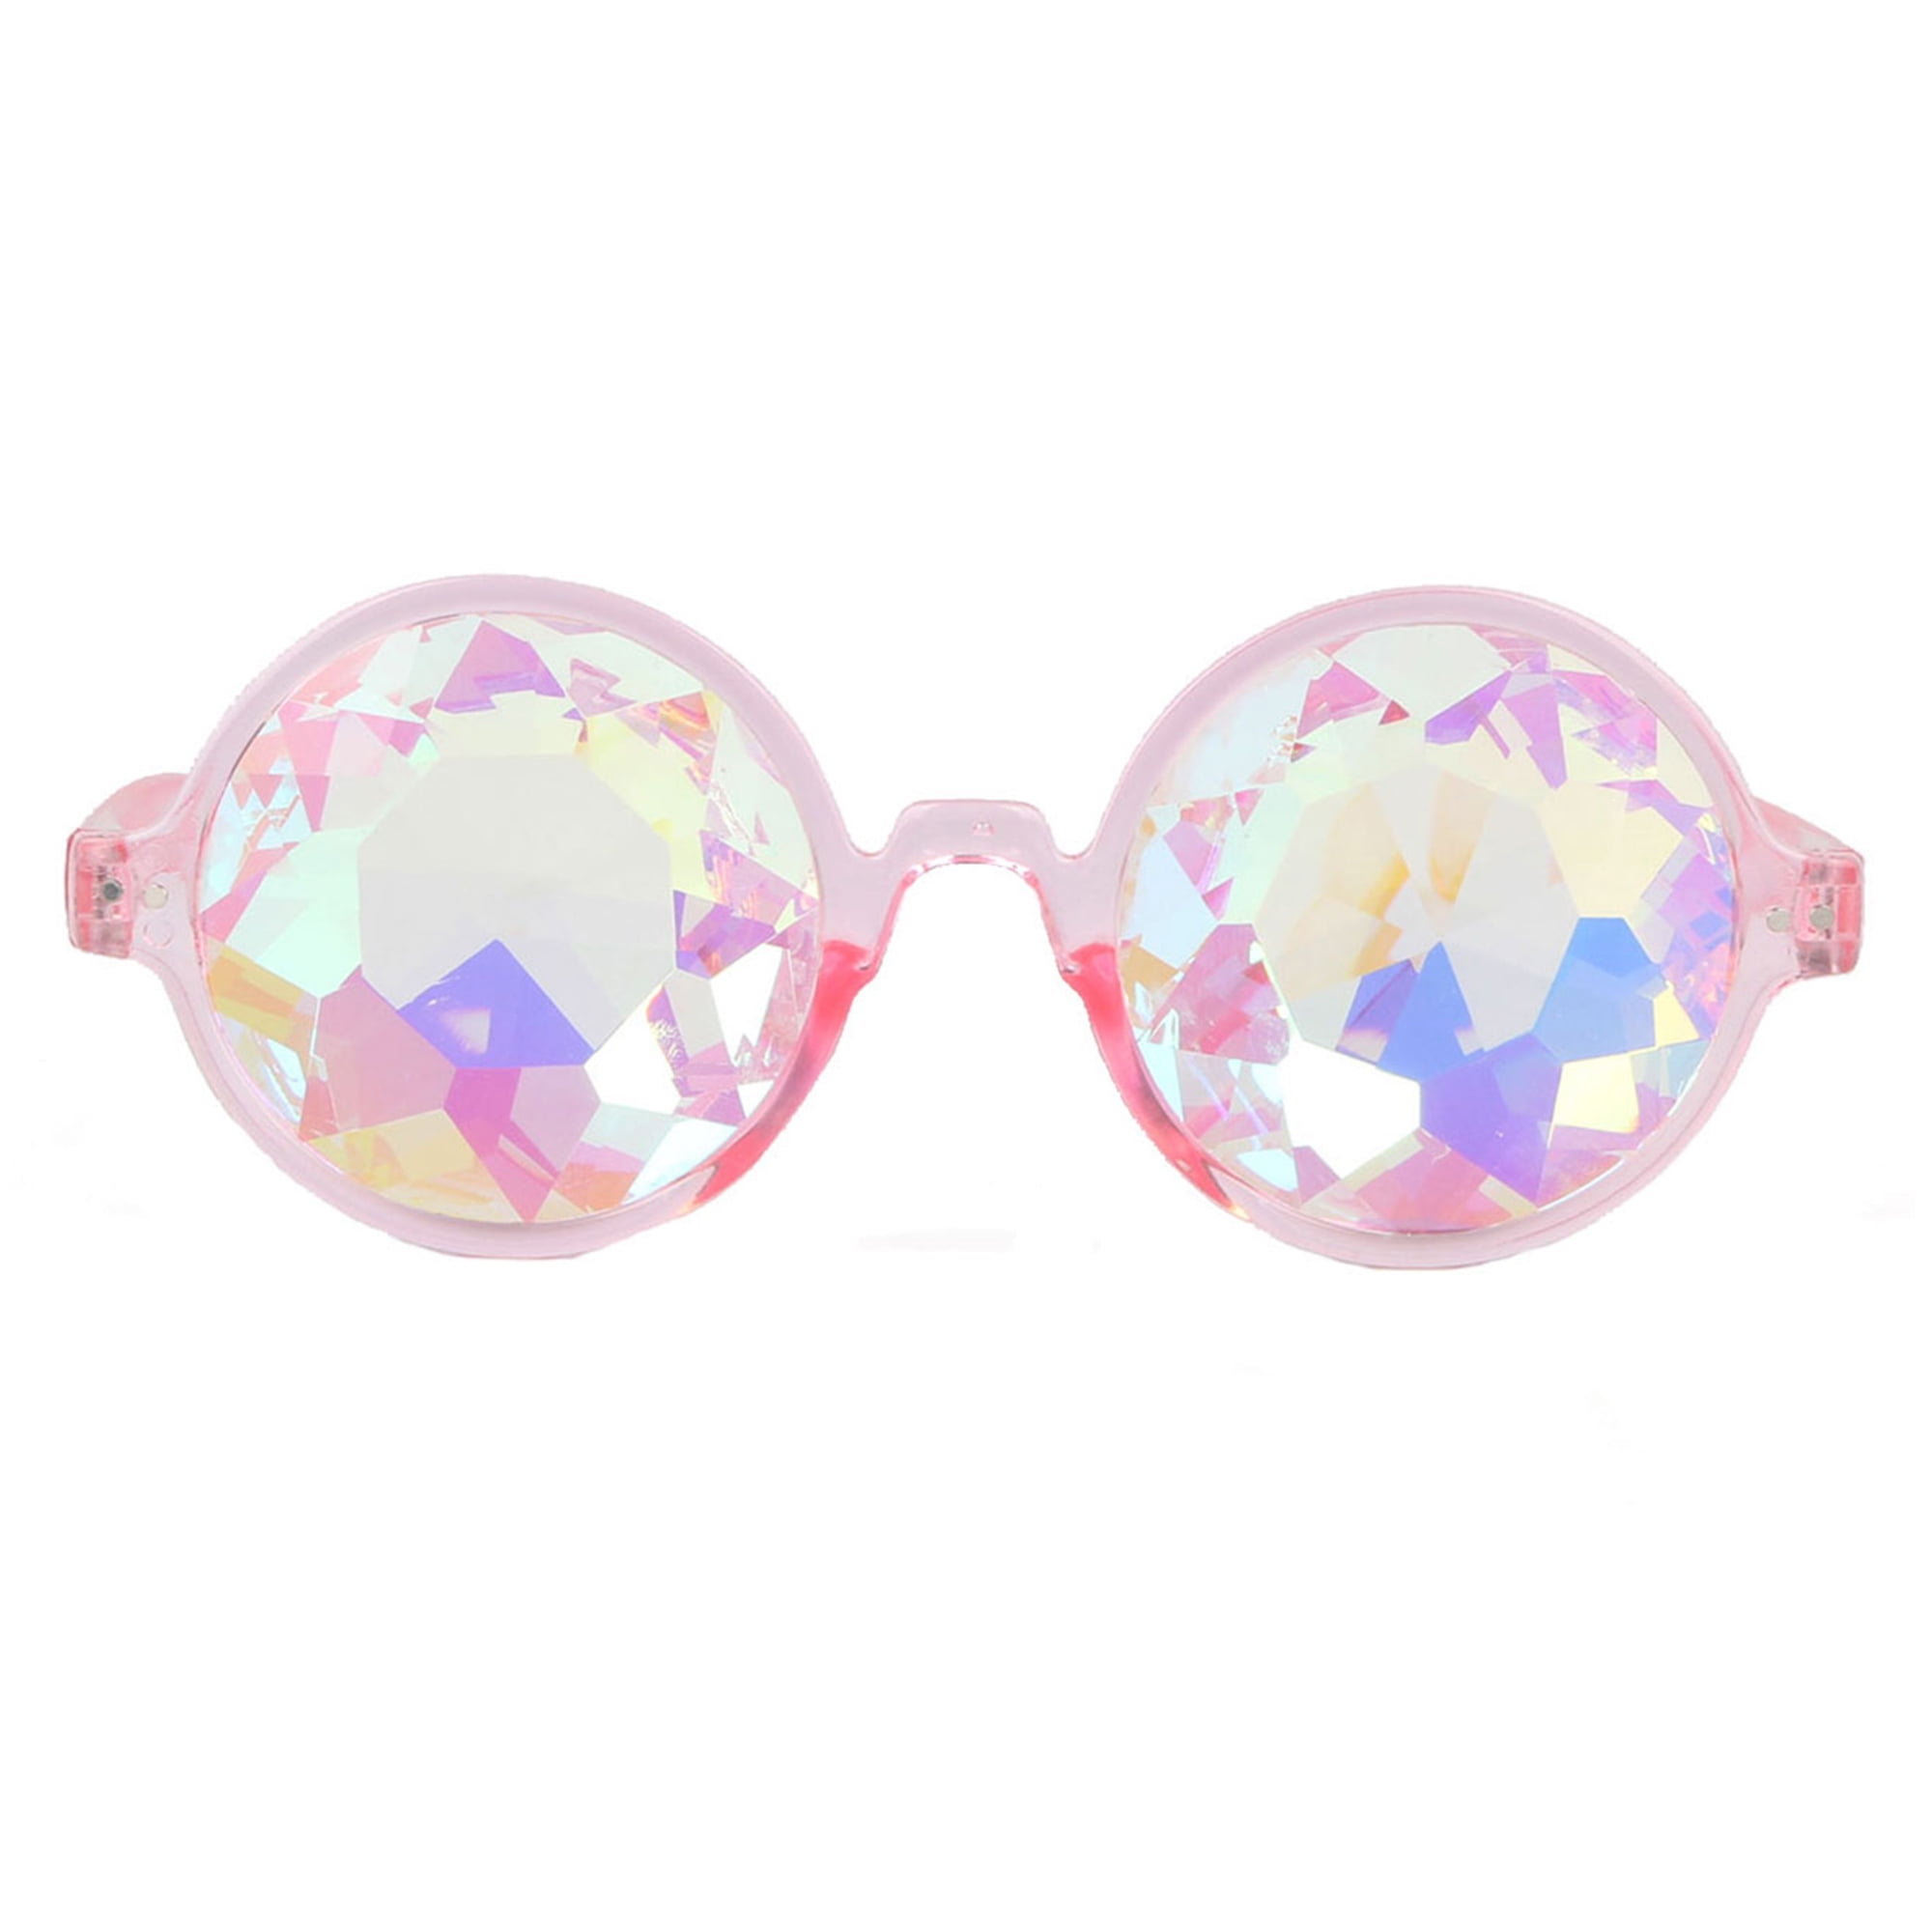 Kaleidoscope Glasses Rainbow Rave Prism Diffraction Crystal Lens Sunglasses Goggles 